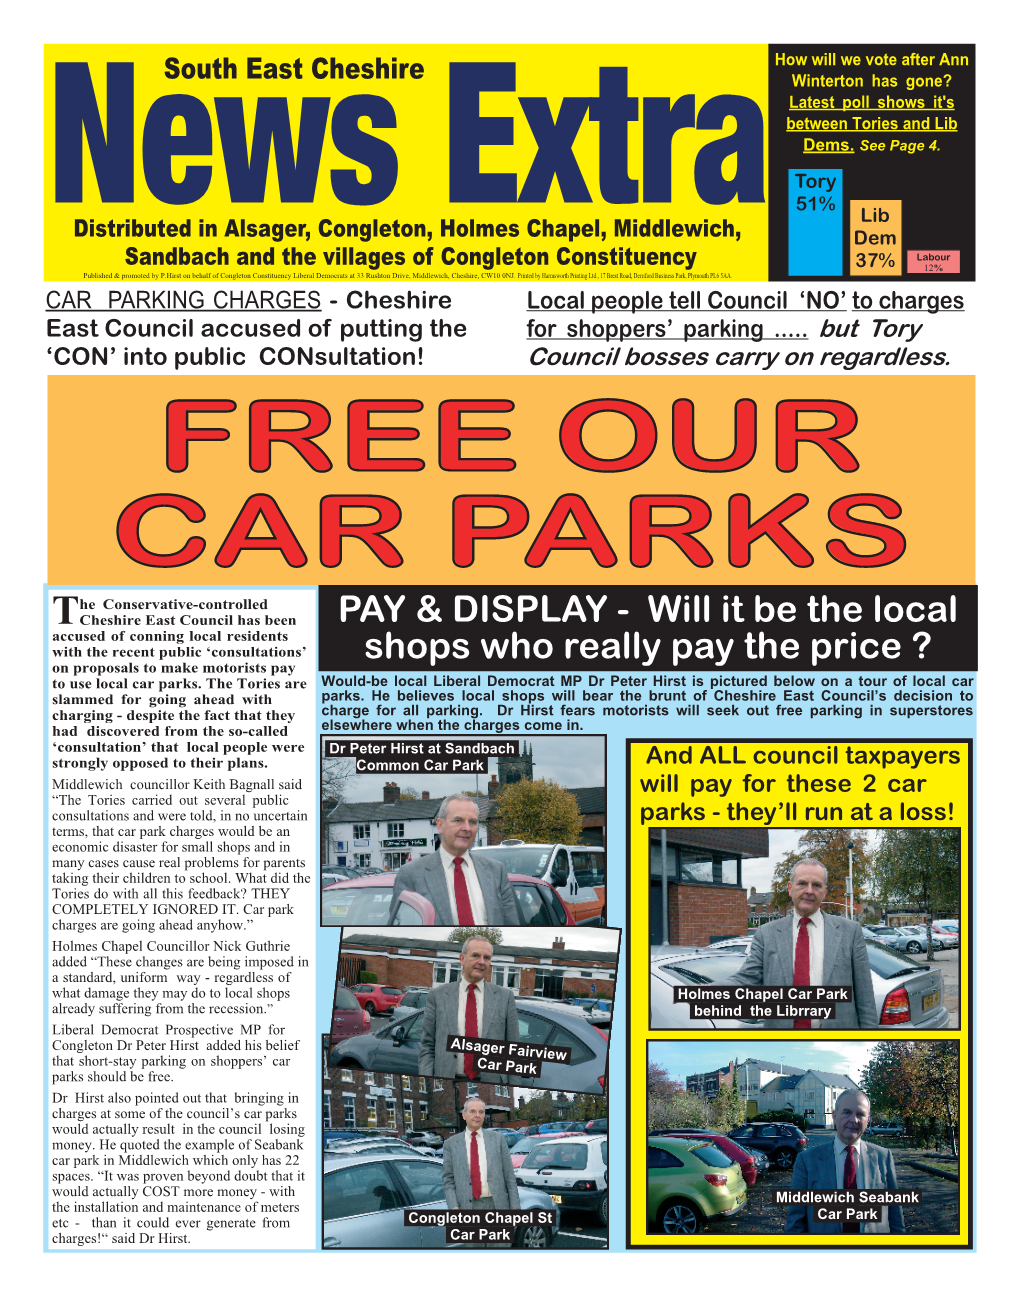 South East Cheshire News Extra